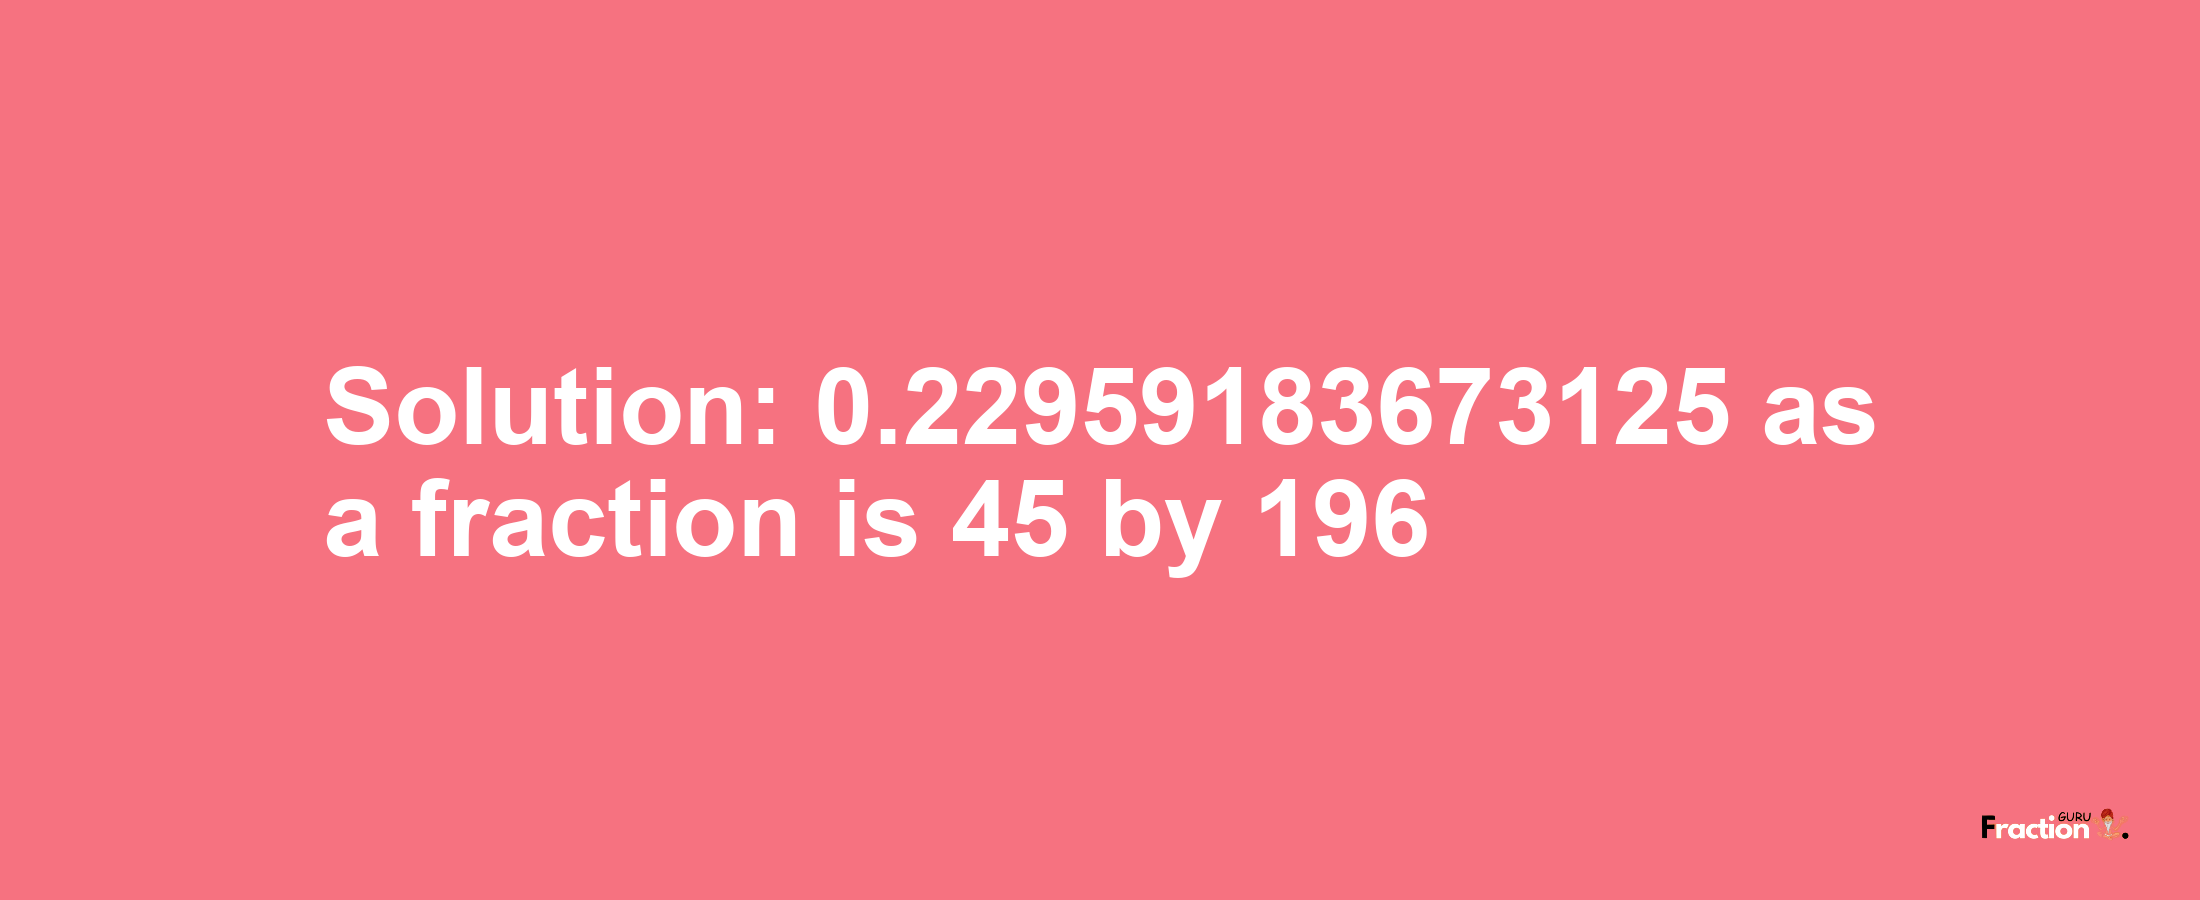 Solution:0.22959183673125 as a fraction is 45/196